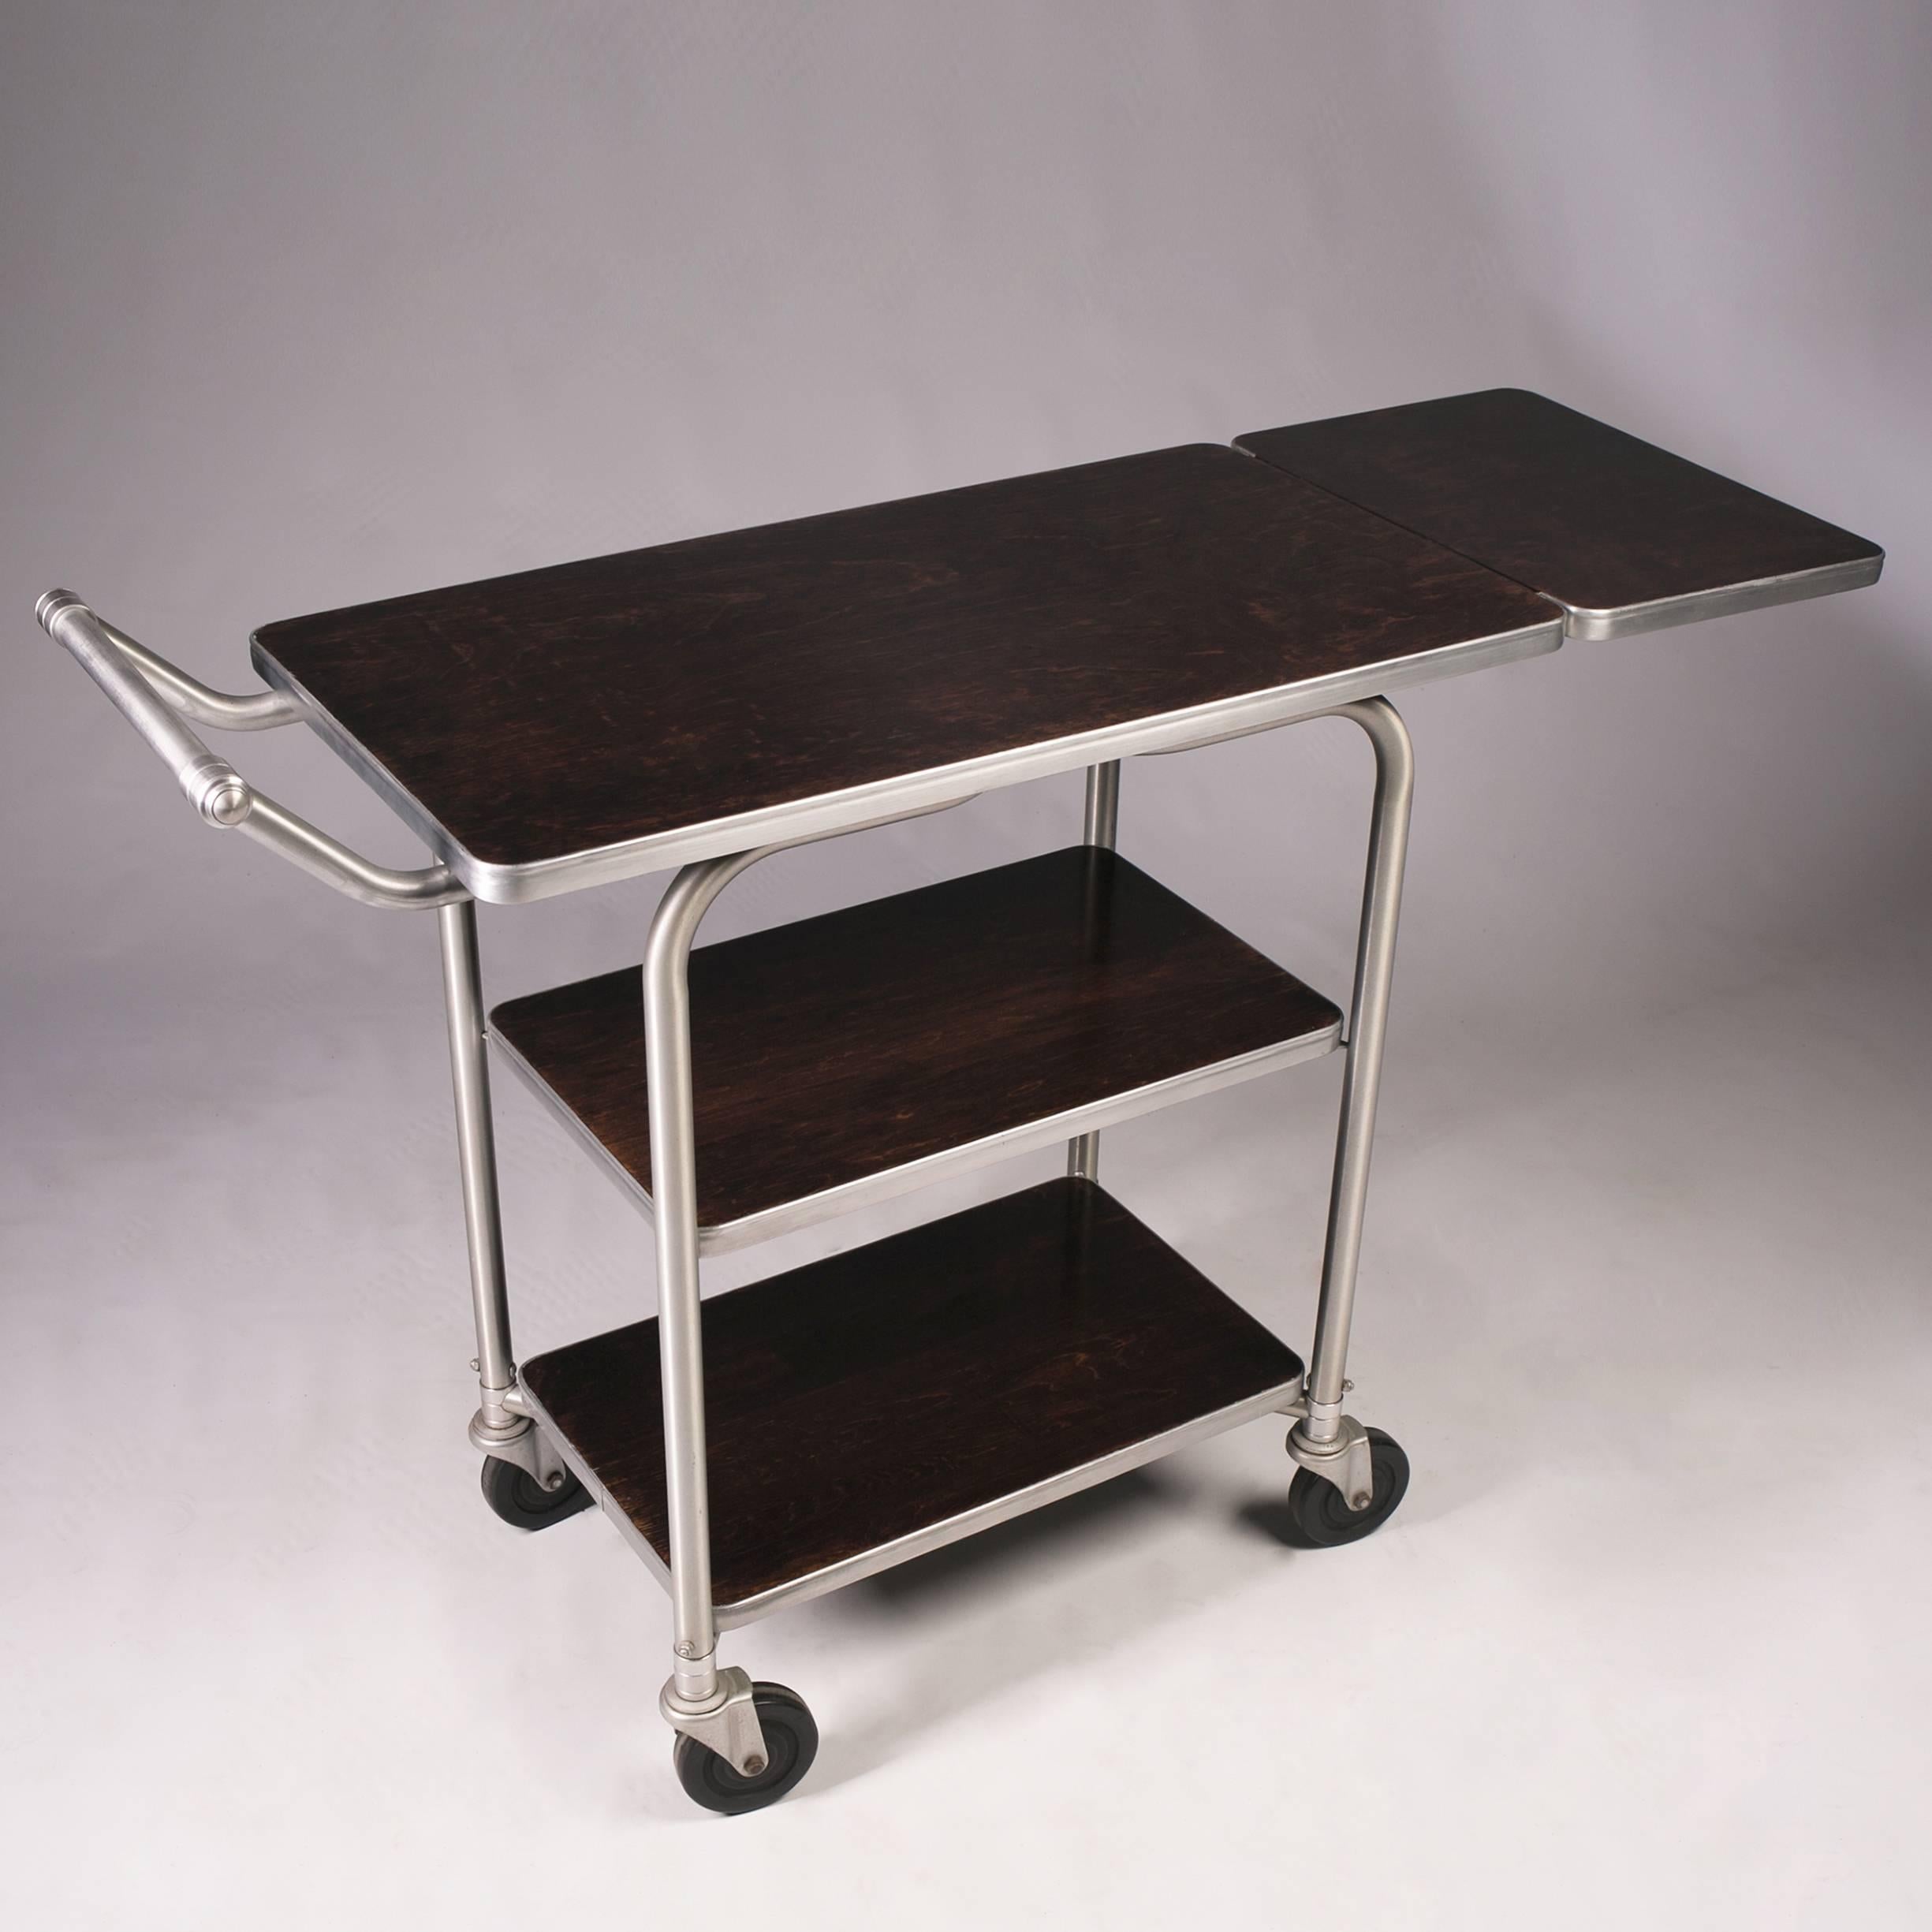 Three-tier cart with casters. Wood surface in a dark brown finish.